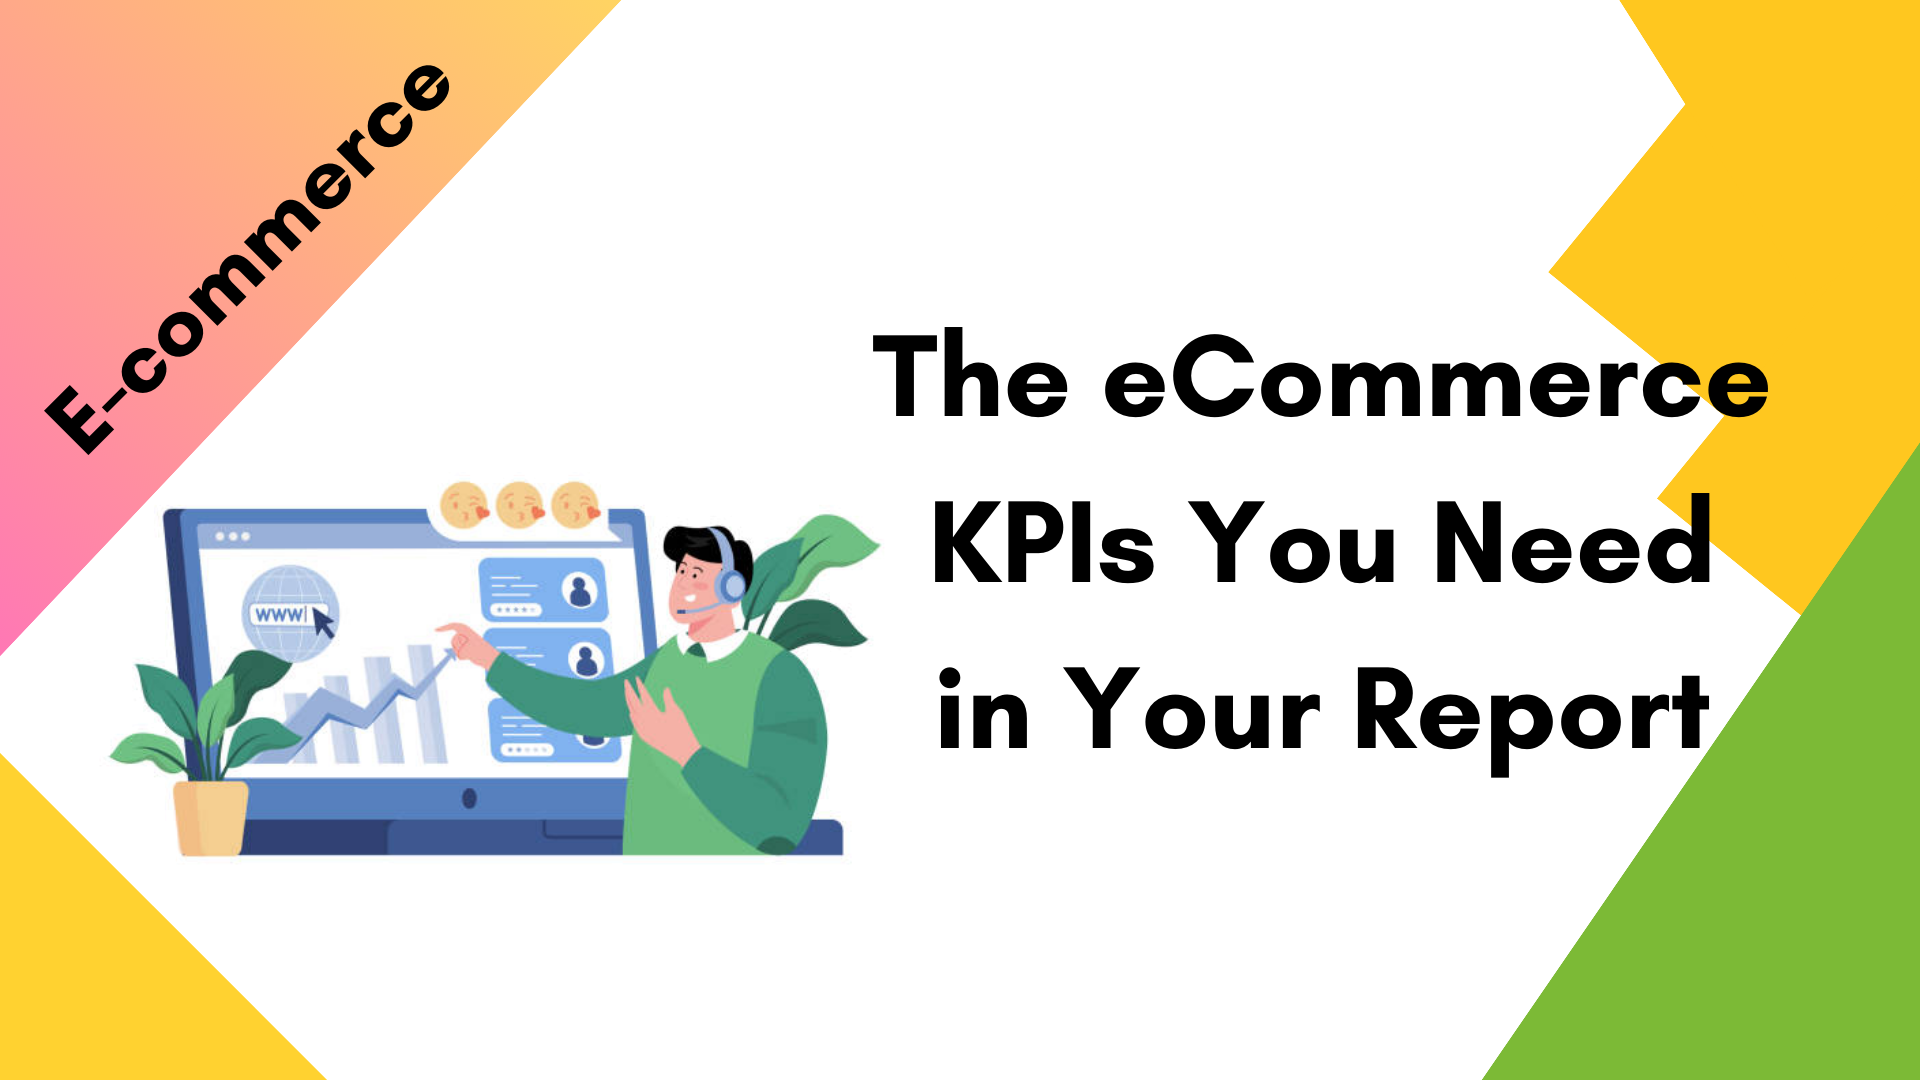 The eCommerce KPIs You Need in Your Report (And Those You Should Stay Away From)